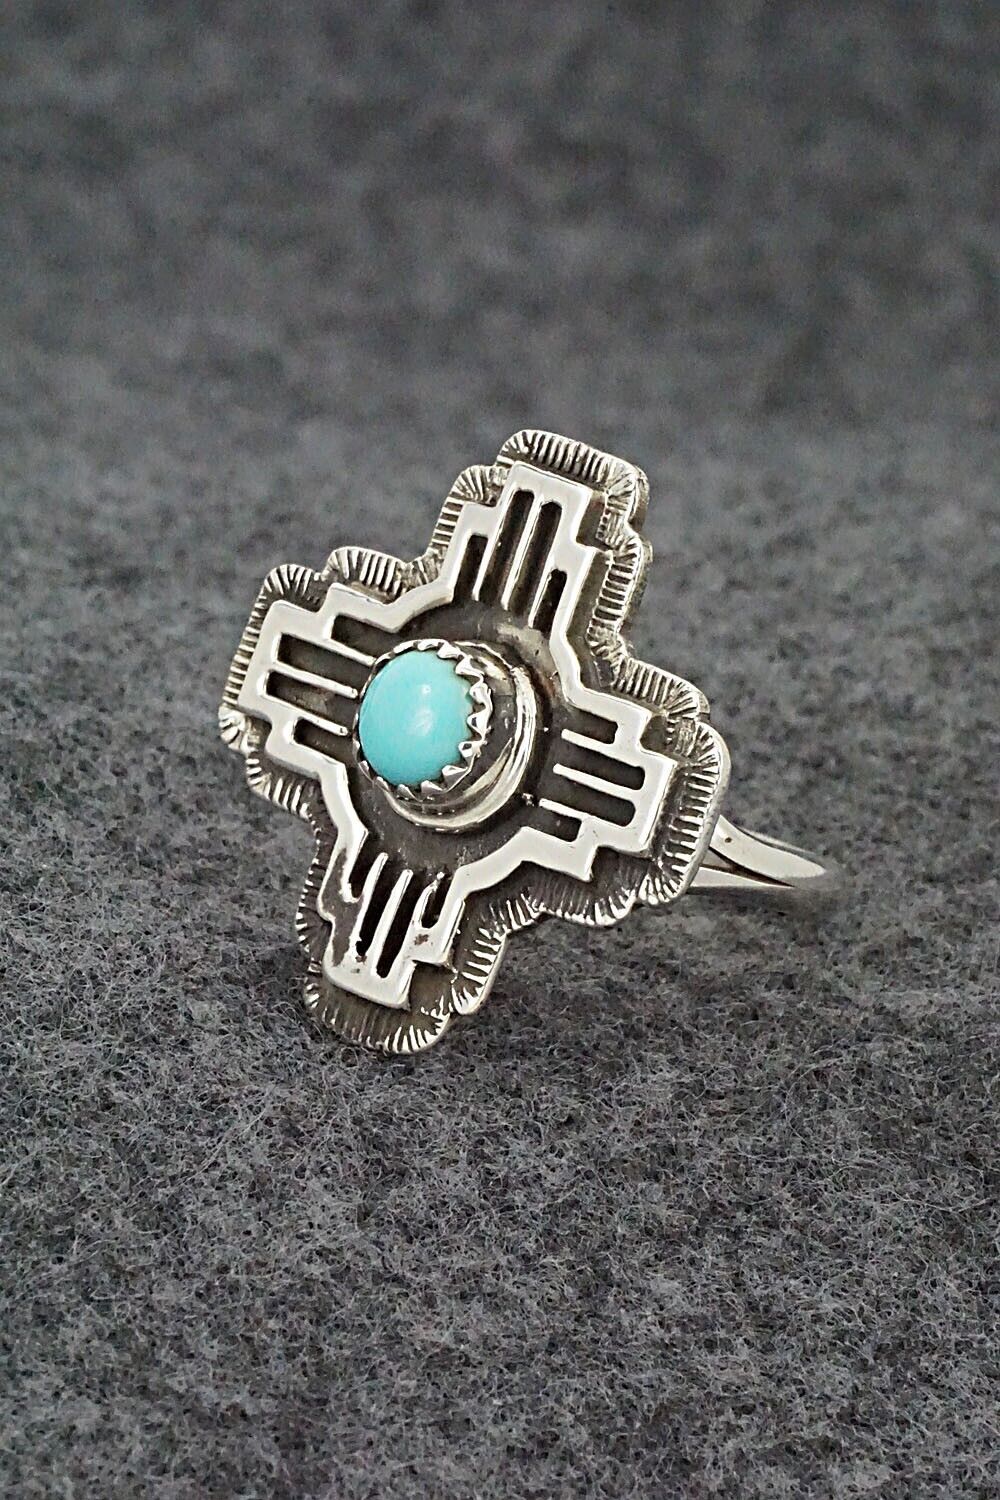 Turquoise and Sterling Silver Ring - Letricia Largo - Size 8